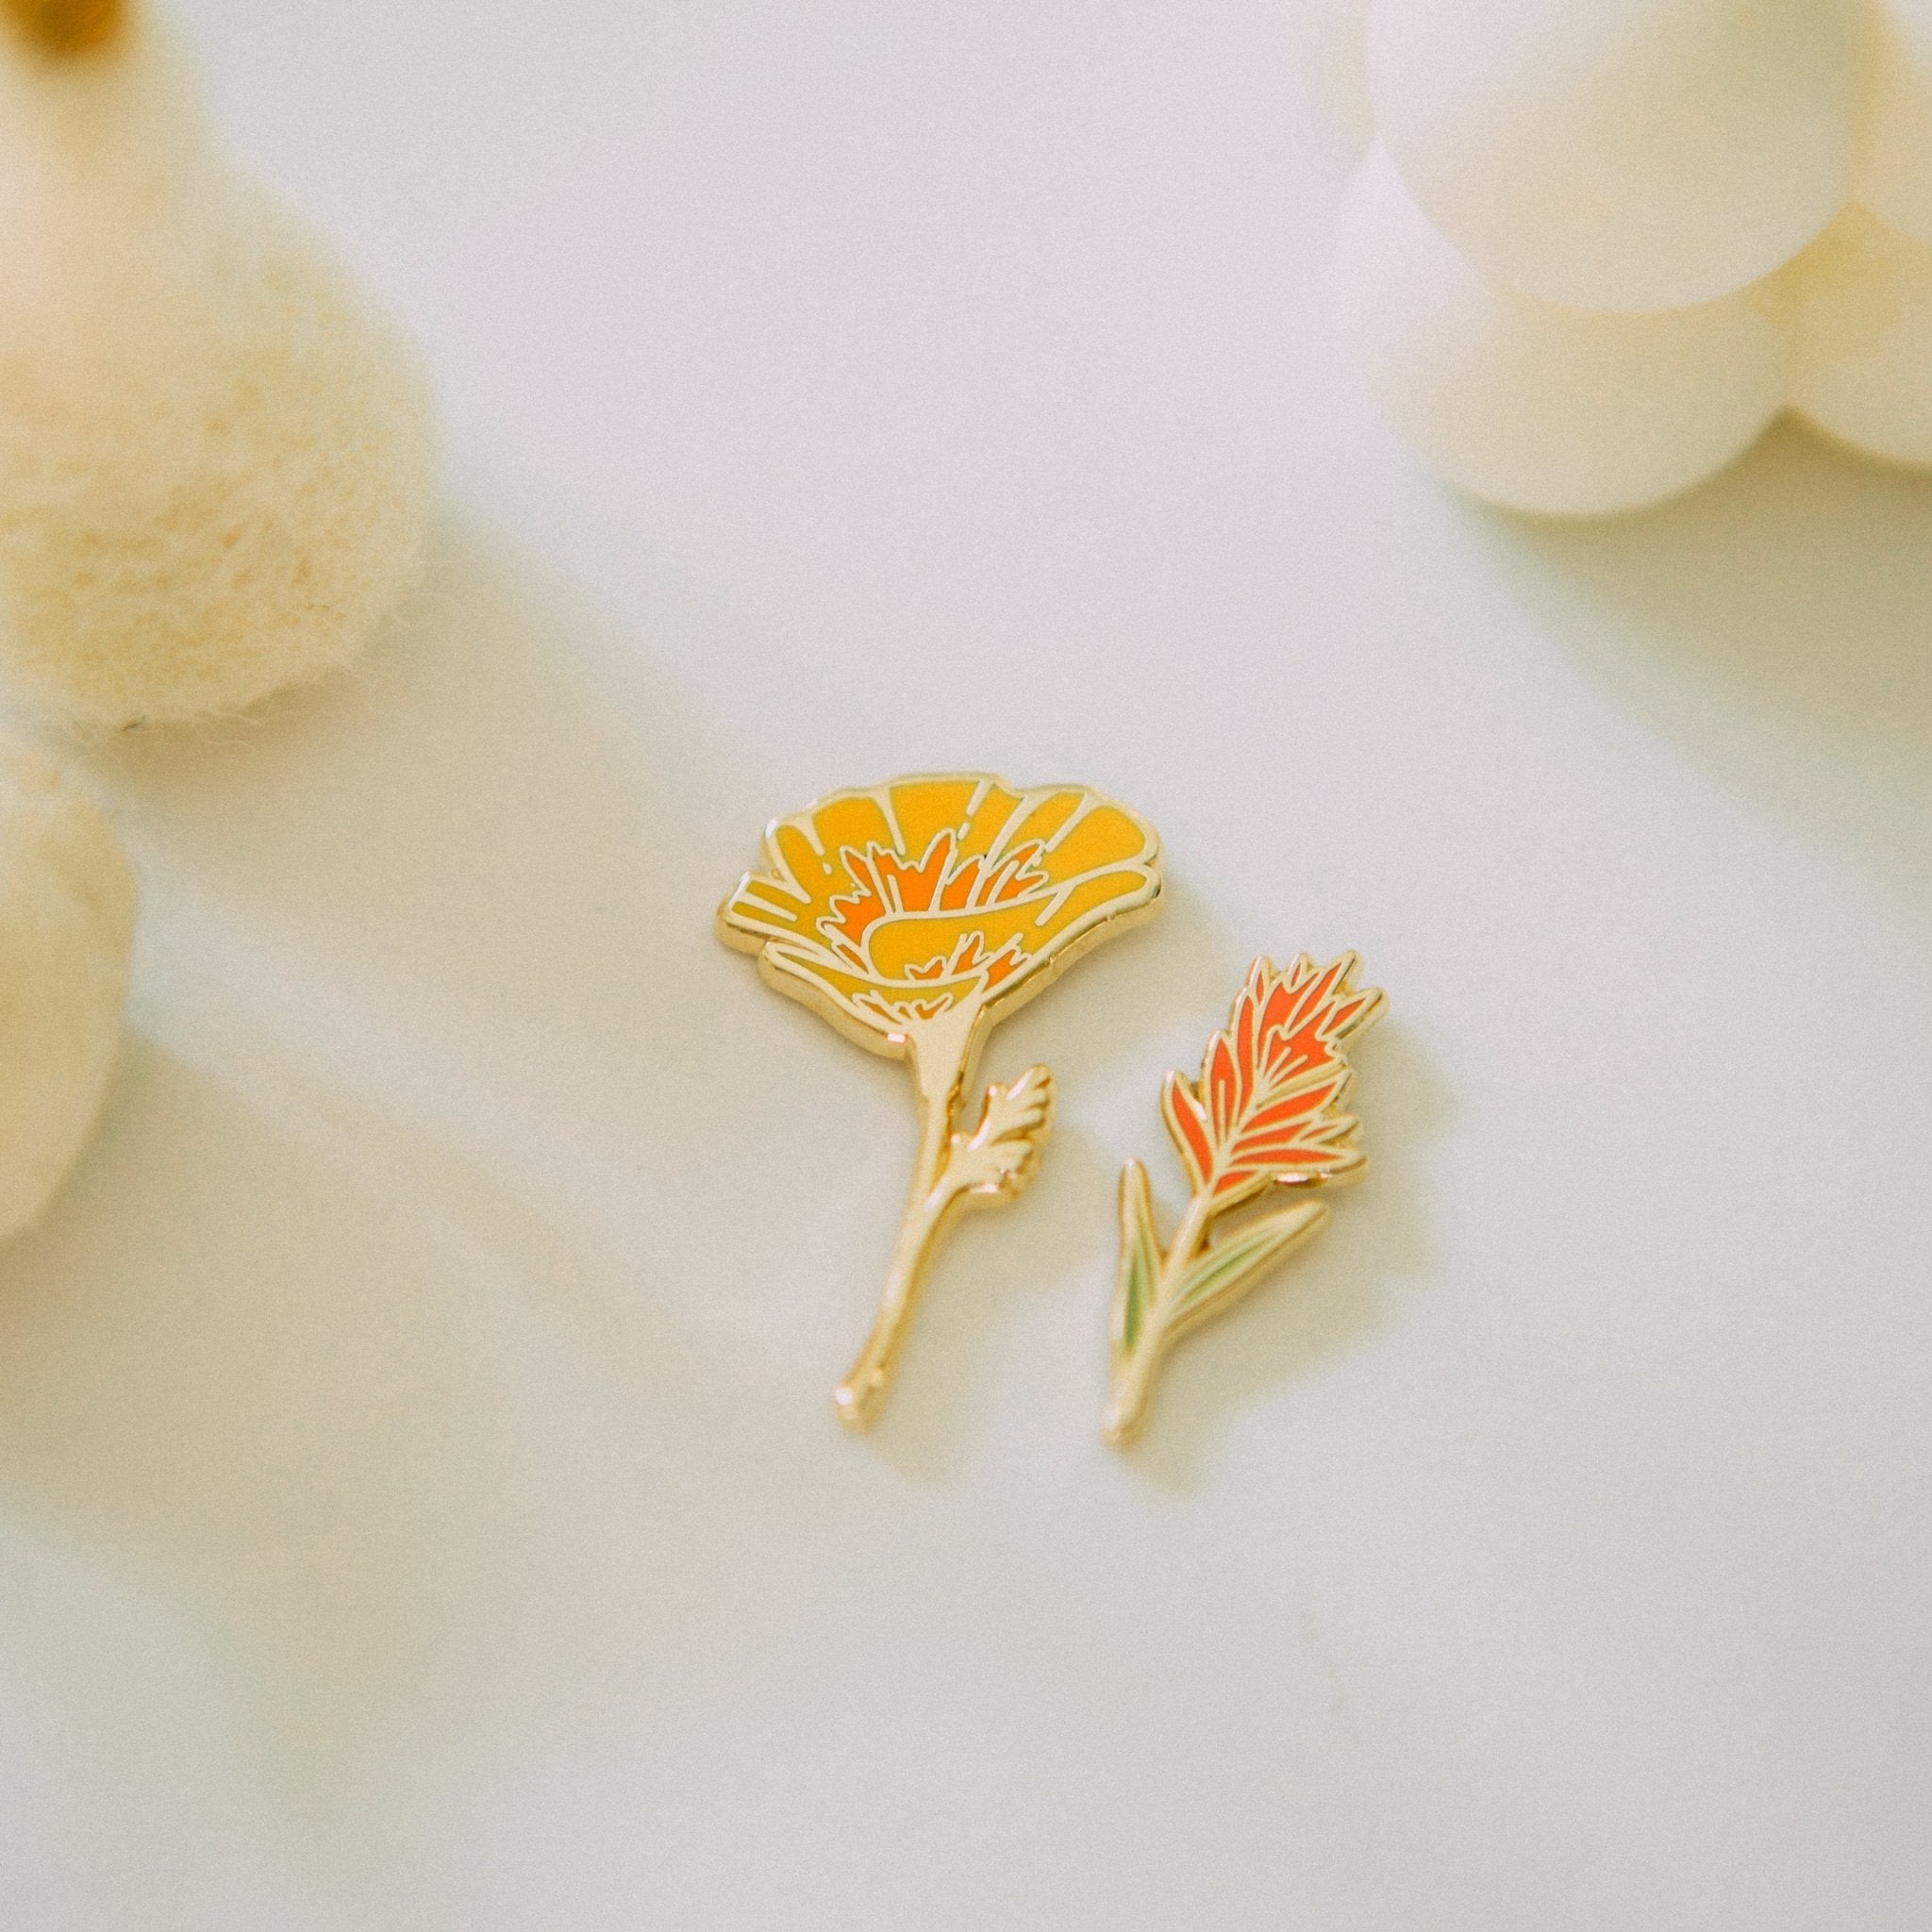 a hard enamel pin of an orange california poppy wildflower made from hard enamel and gold metal plating. a cute plant wildflower pin for backpacks, totes, hats, lapels, and jackets